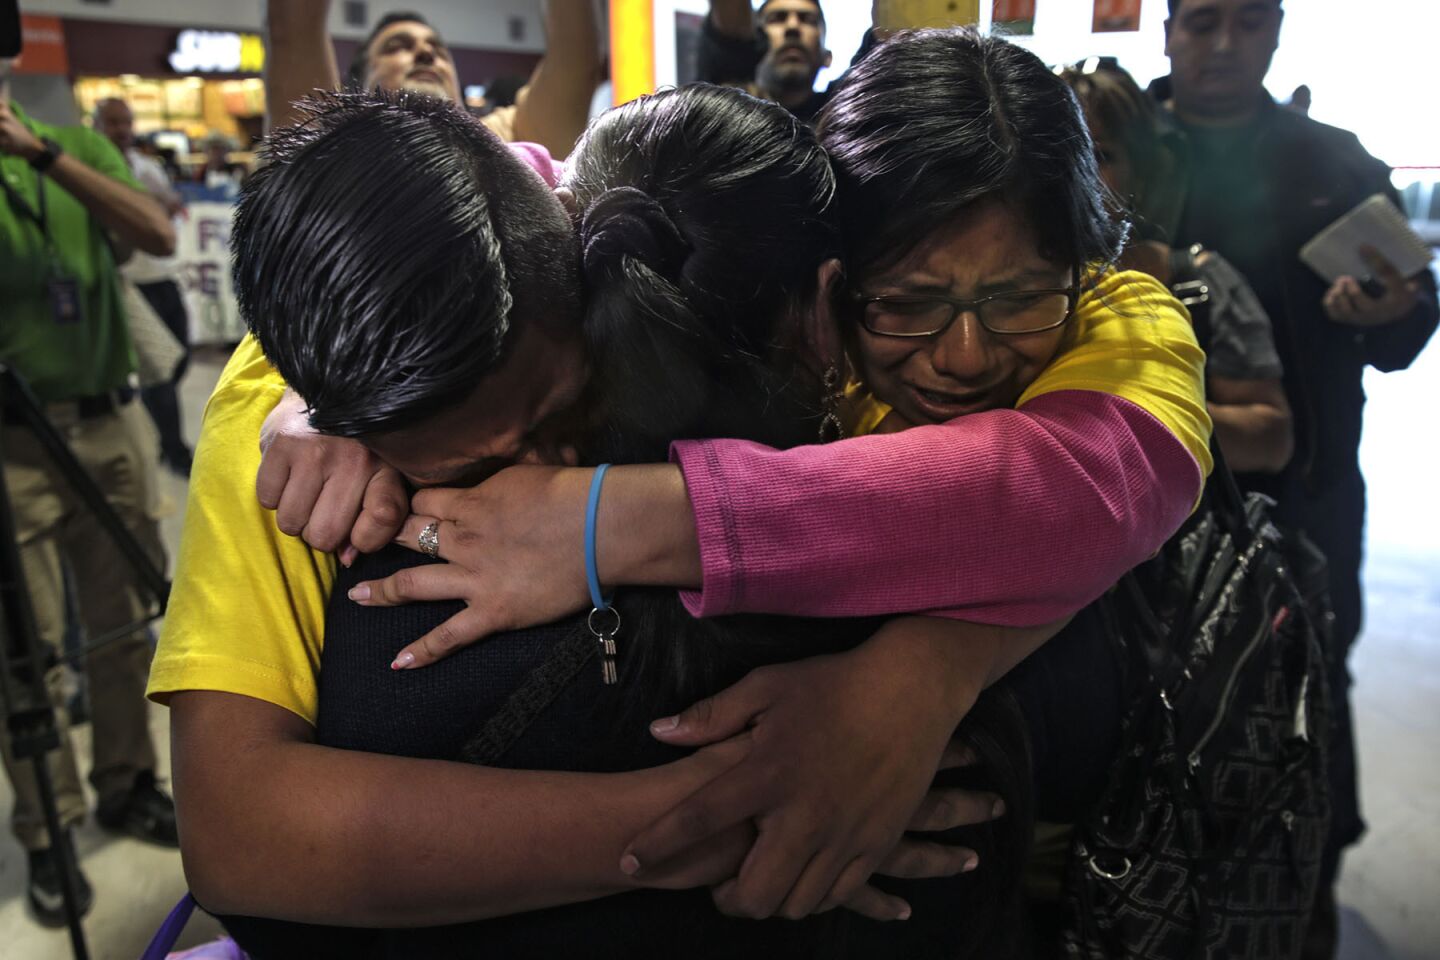 Maria de Lourdes Molina Garcia reunites Tuesday with her children, Iris, right, and Luis Hipolito at the Abraham Gonzalez International Airport in Ciudad Juarez during Pope Francis' visit to Mexico. Luis and Iris live in Los Angeles, separated from their mother, who lives in Oaxaca, Mexico.